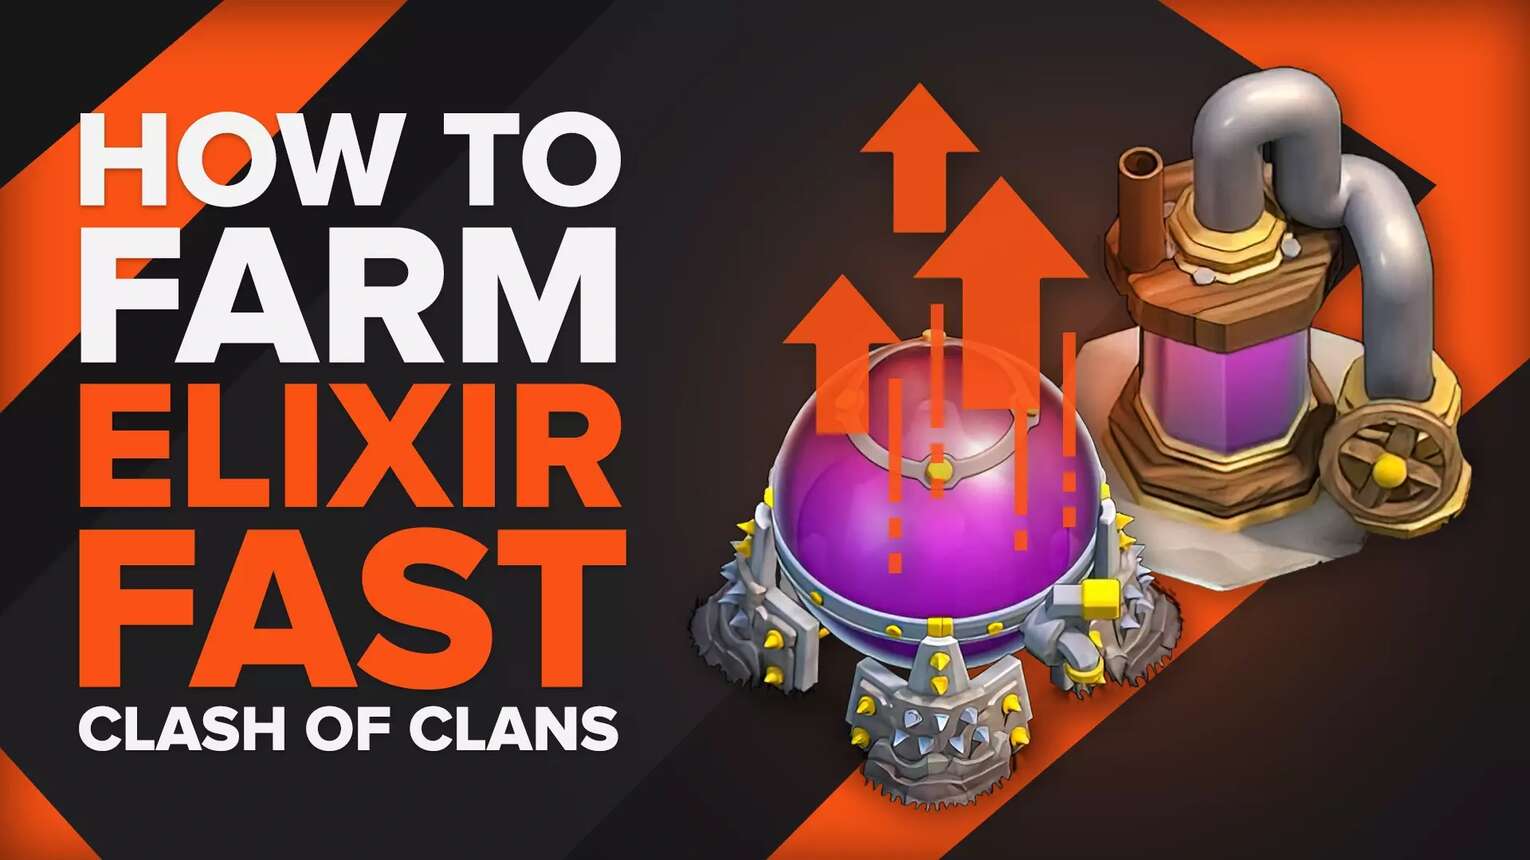 How To Farm Elixir Fast In Clash Of Clans [4 Methods]